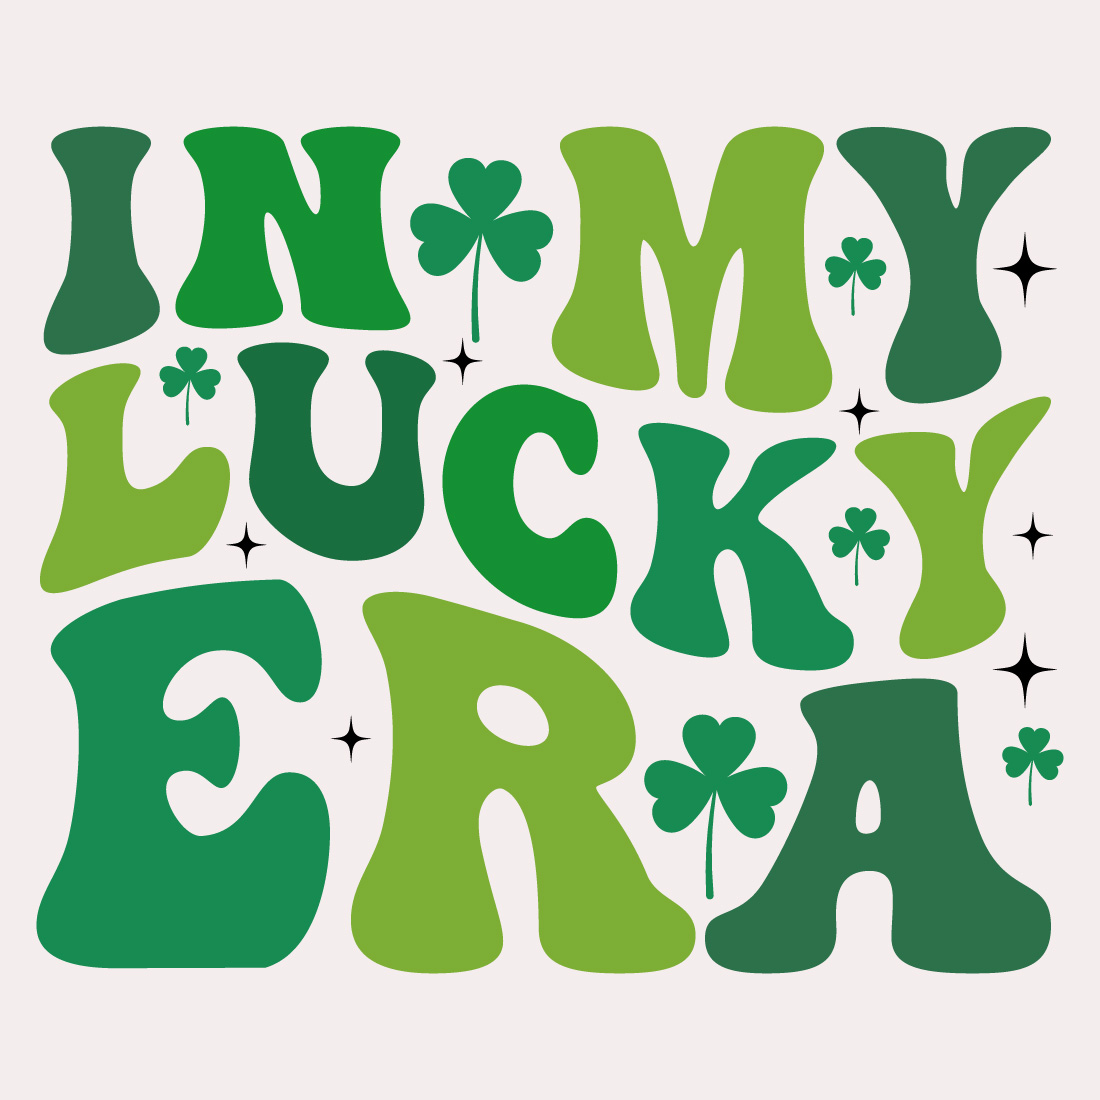 In My Lucky Era Retro,Svg,Era T shirt,Happy St Patrick Day Svg,Patricks Day Saying,Shamrock Svg,Clover Svg,Lucky,Pinches Svg,Irish Svg,Funny St Patrick's,Instant Download,T shirt,Svg Cut File,Cricut preview image.